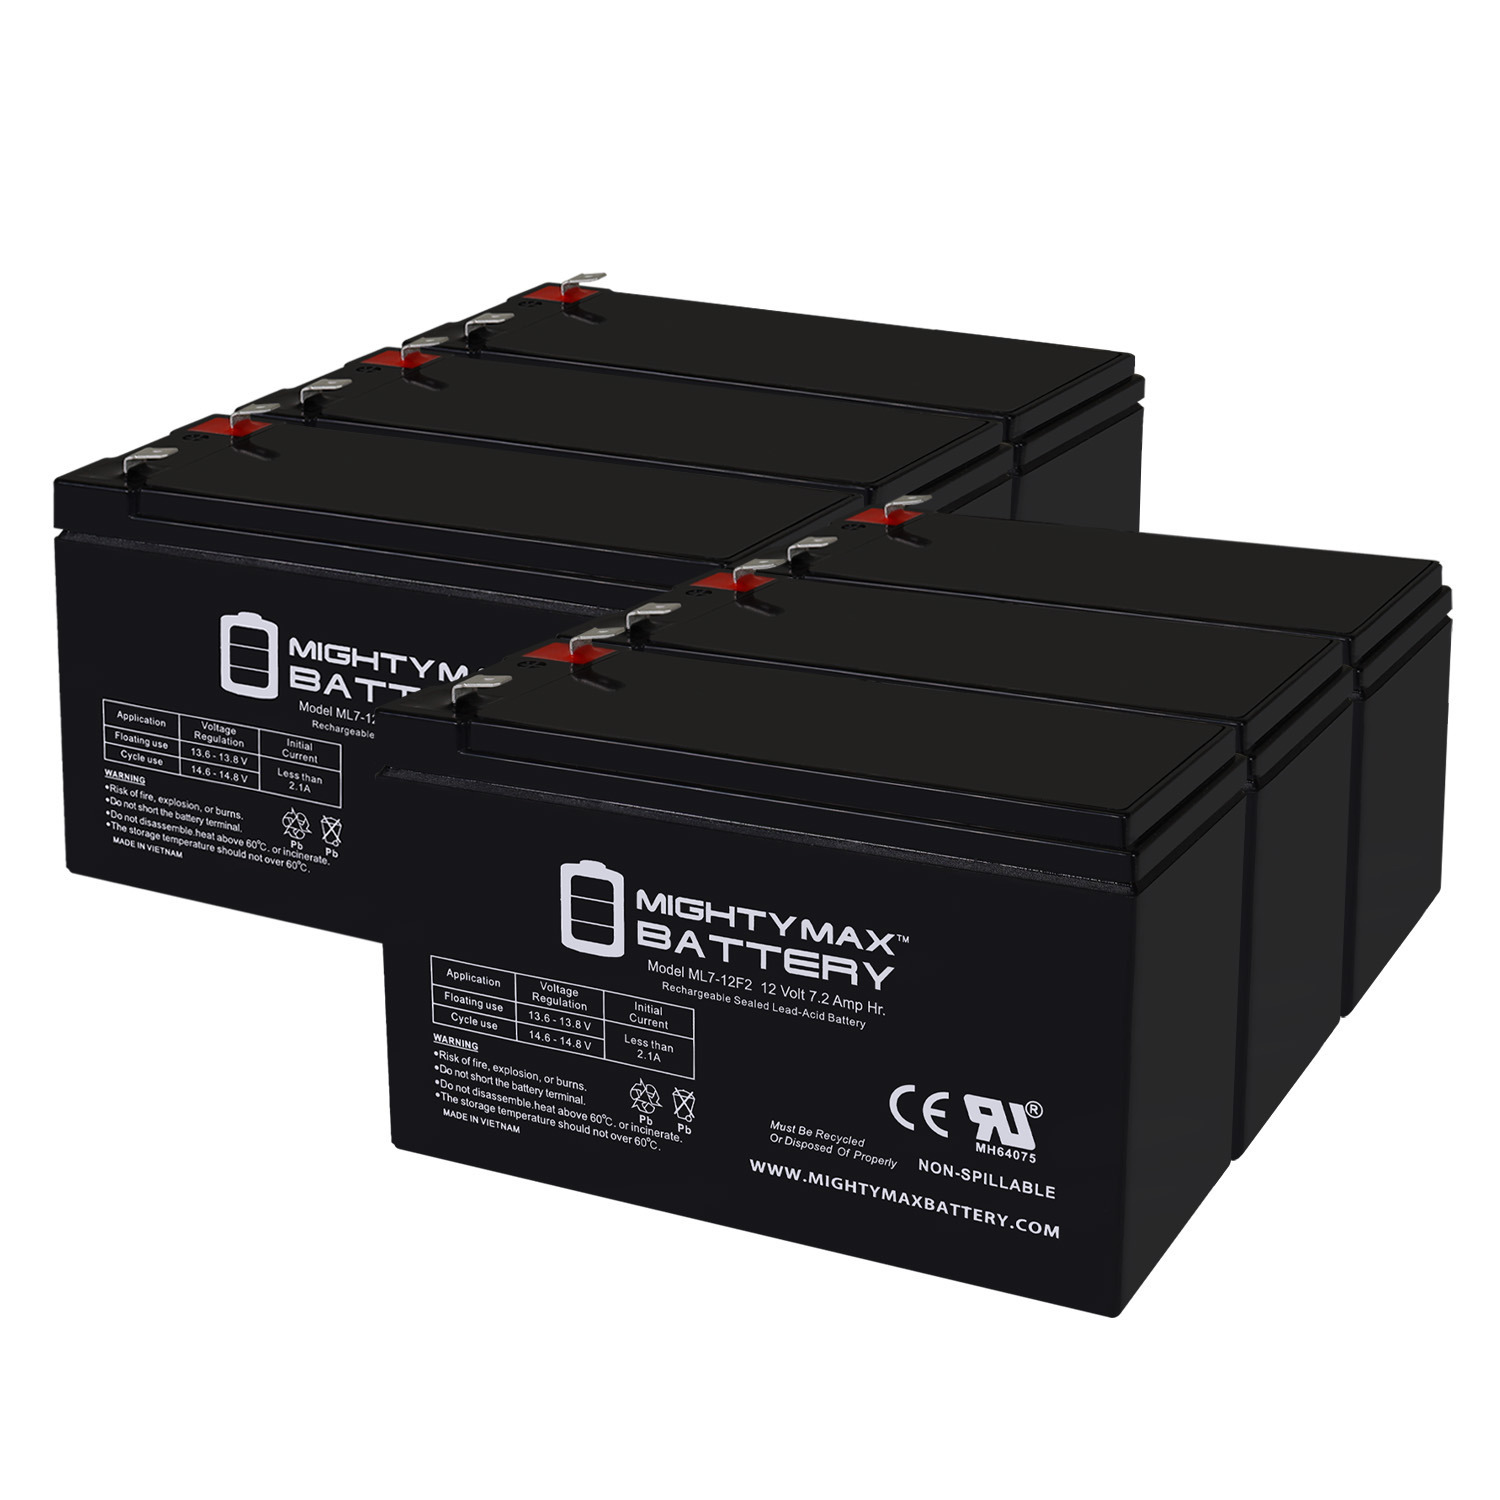 12V 7Ah F2 Replacement Battery for Unisys PW9120 one BAT-3000 - 6 Pack